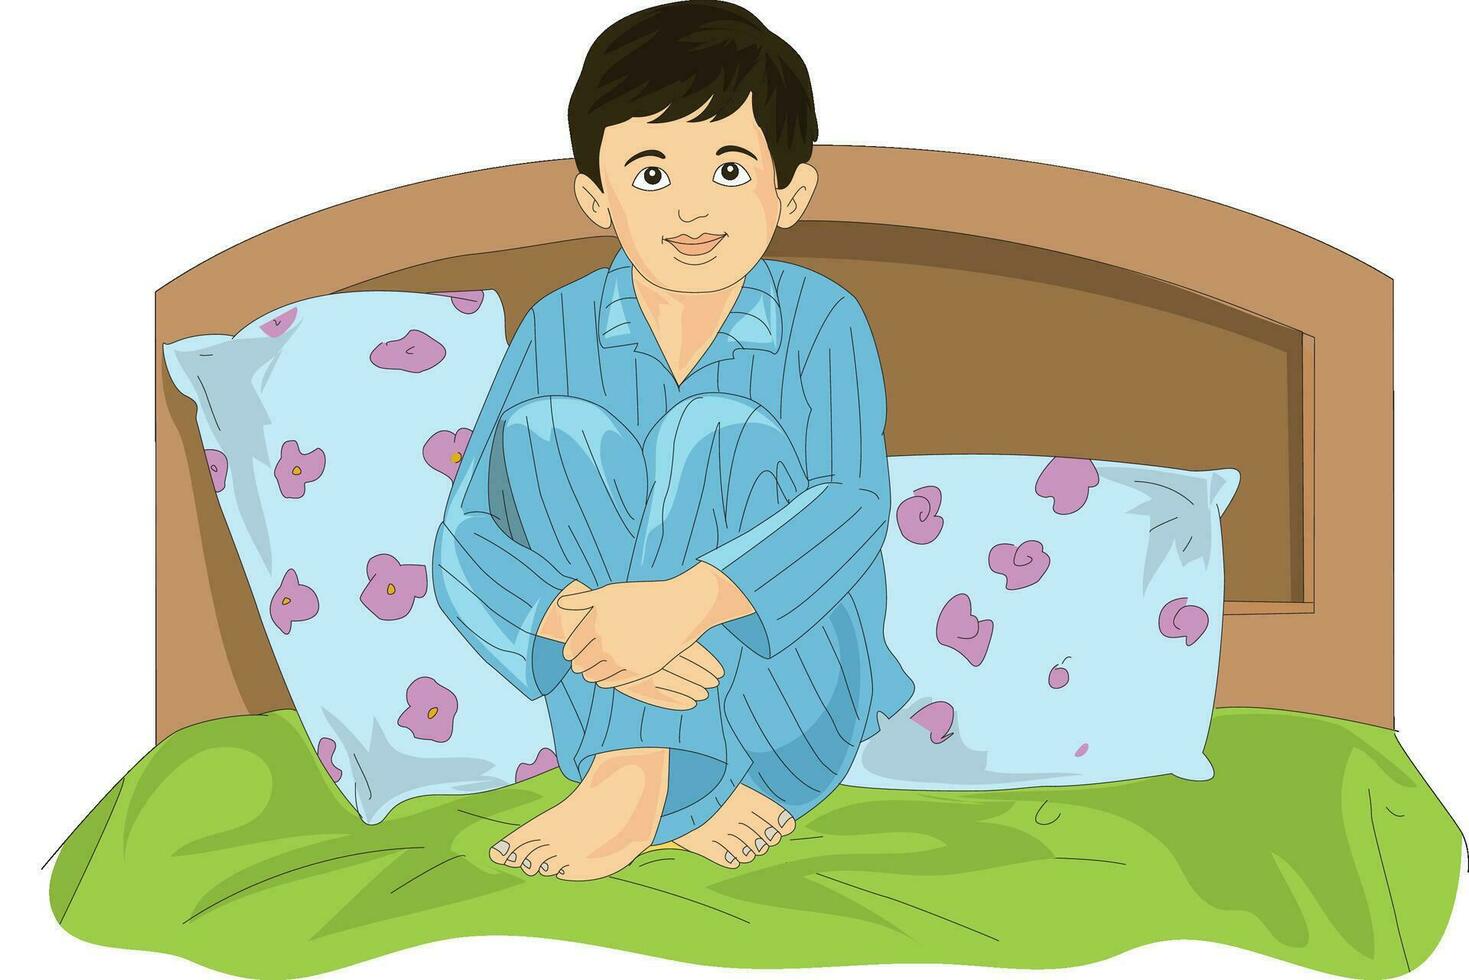 Cute boy wearing a night suit and sitting on bed vector